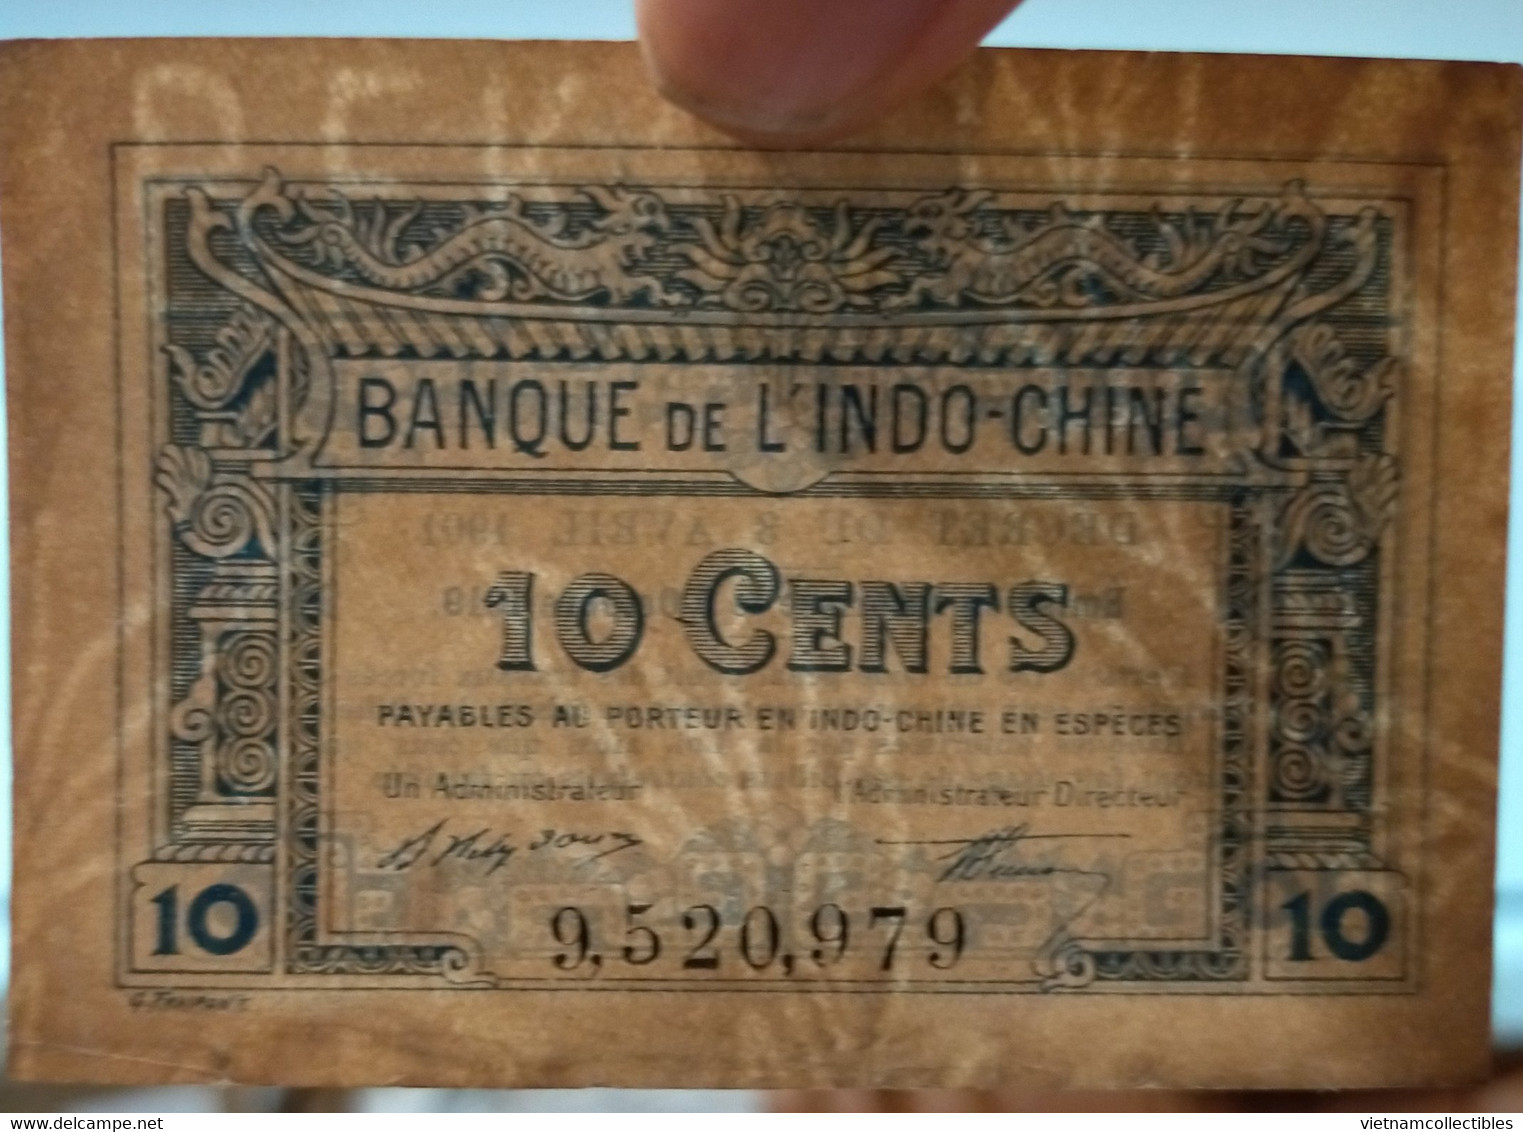 French Indochina Indo China Indochine Laos Vietnam Cambodia 10 Cents EF Banknote Note 1901 - 1919 - P# 43 / 03 Photos - Indochine